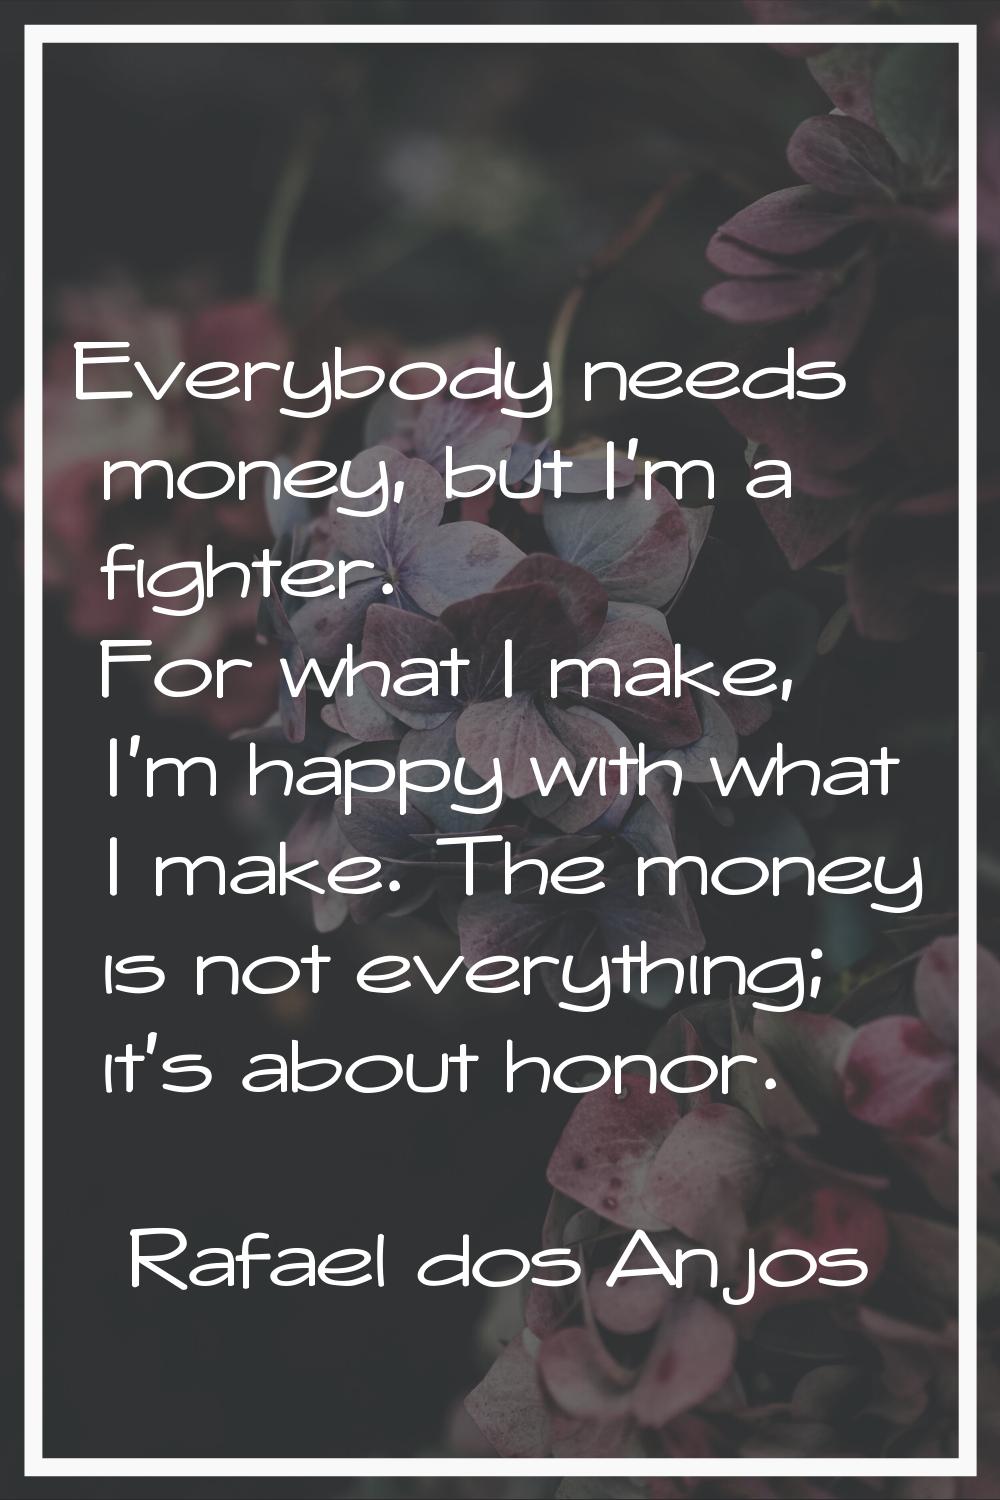 Everybody needs money, but I'm a fighter. For what I make, I'm happy with what I make. The money is